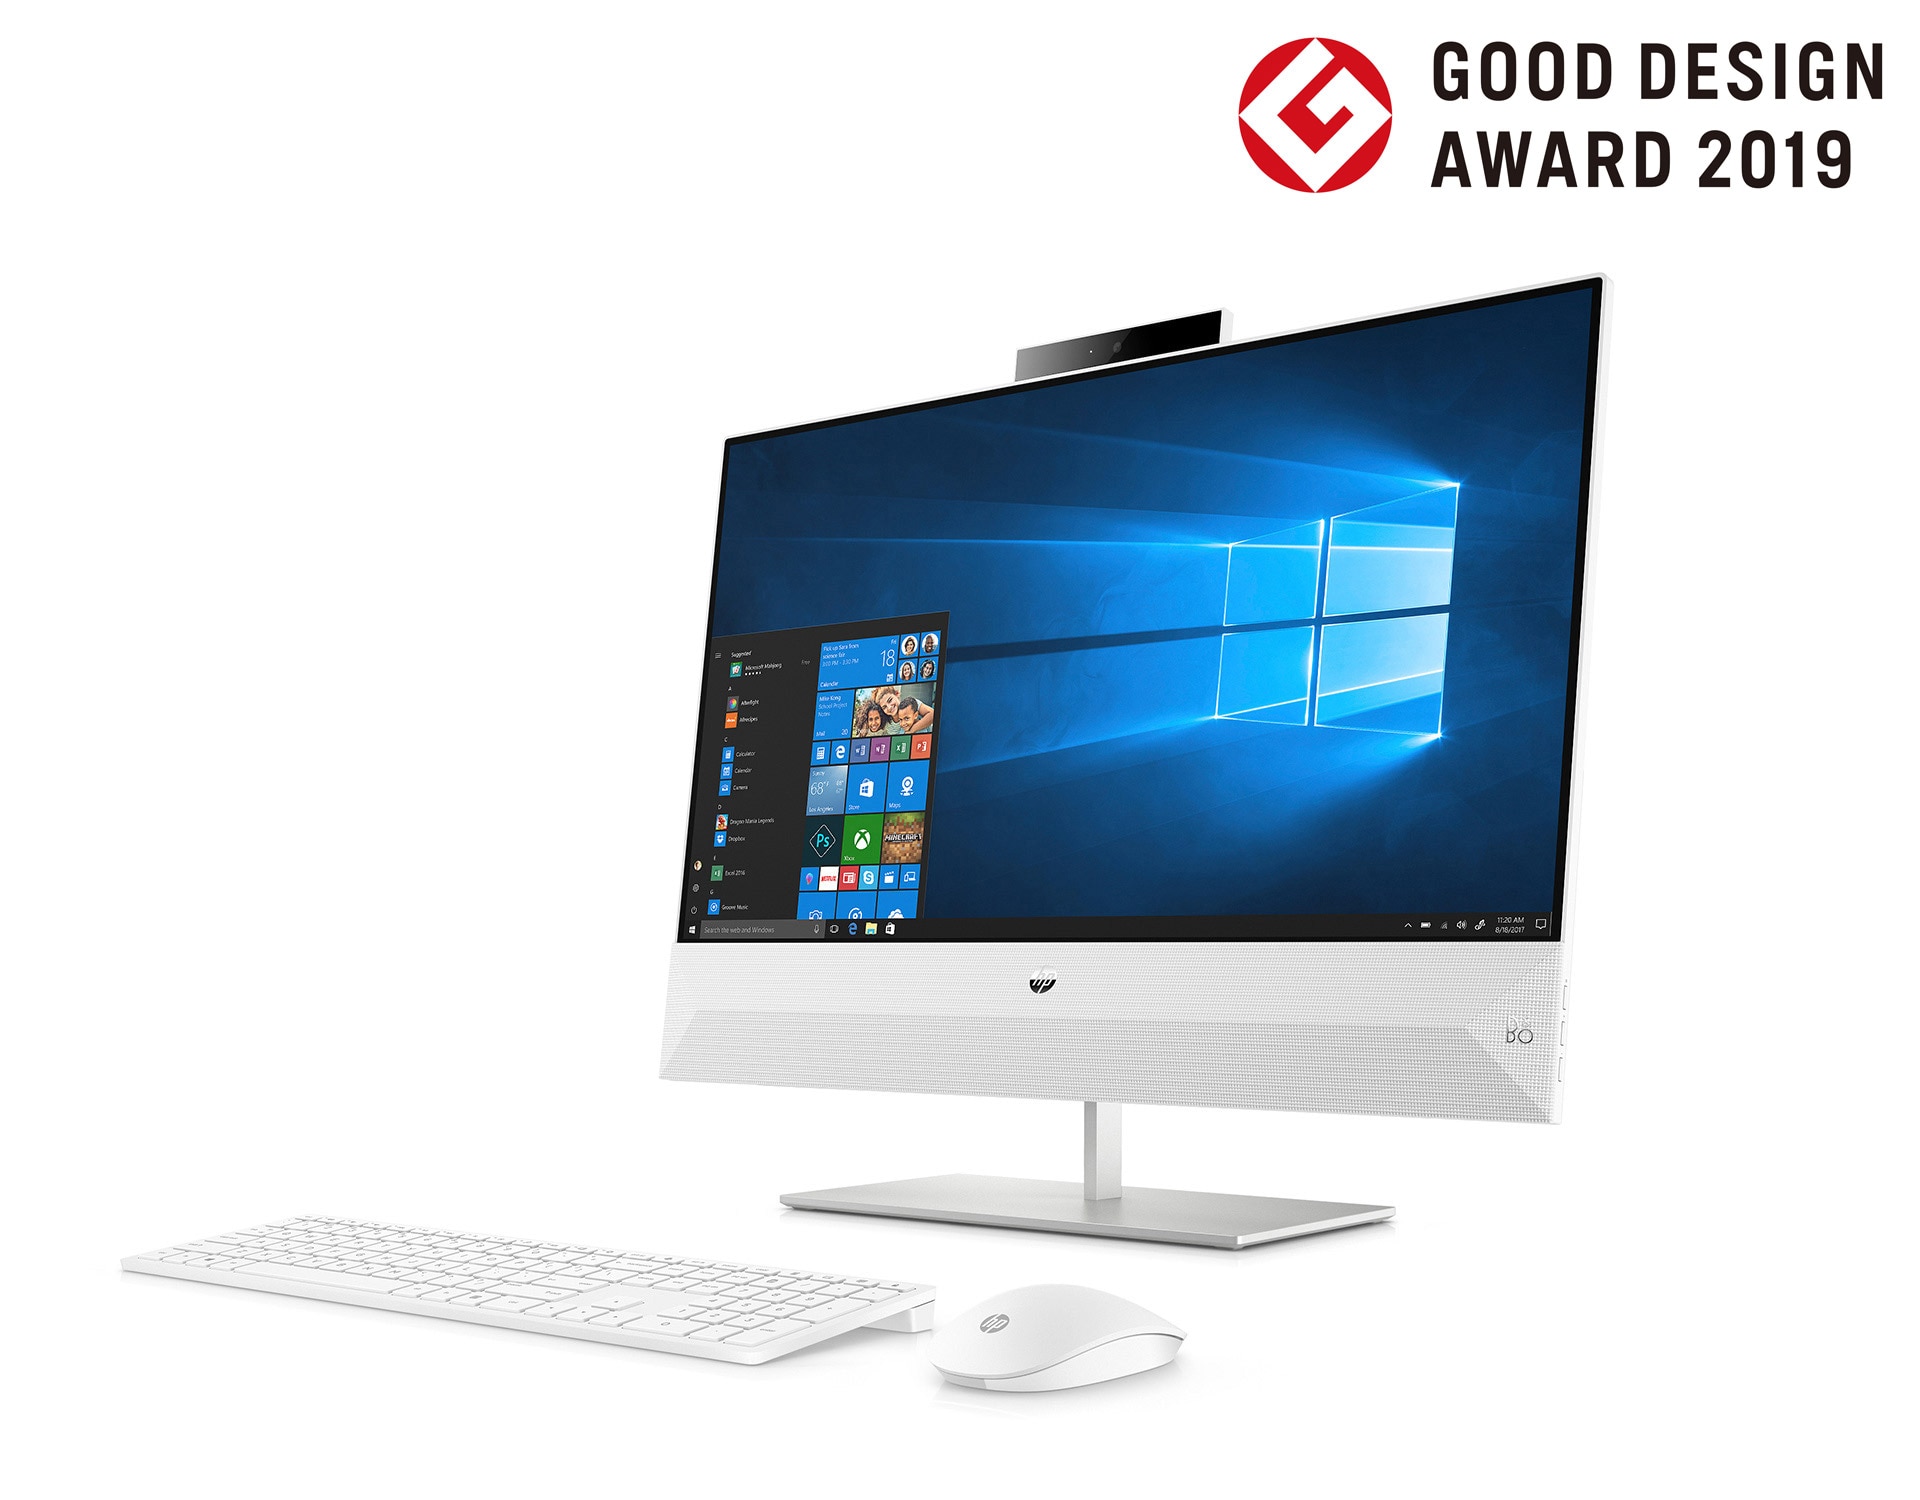 HP Pavilion All-in-One 24（インテル）